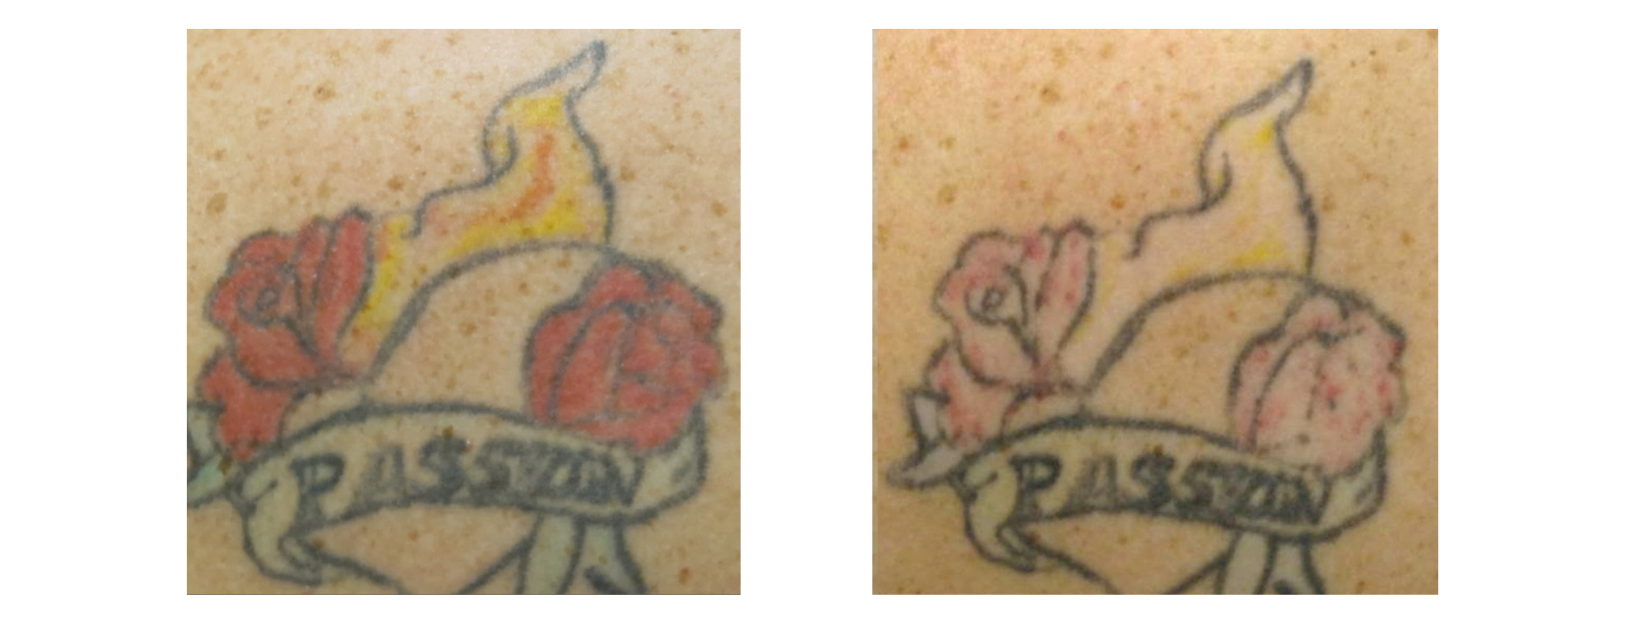 Tattoo Removal Colours Red and Yellow